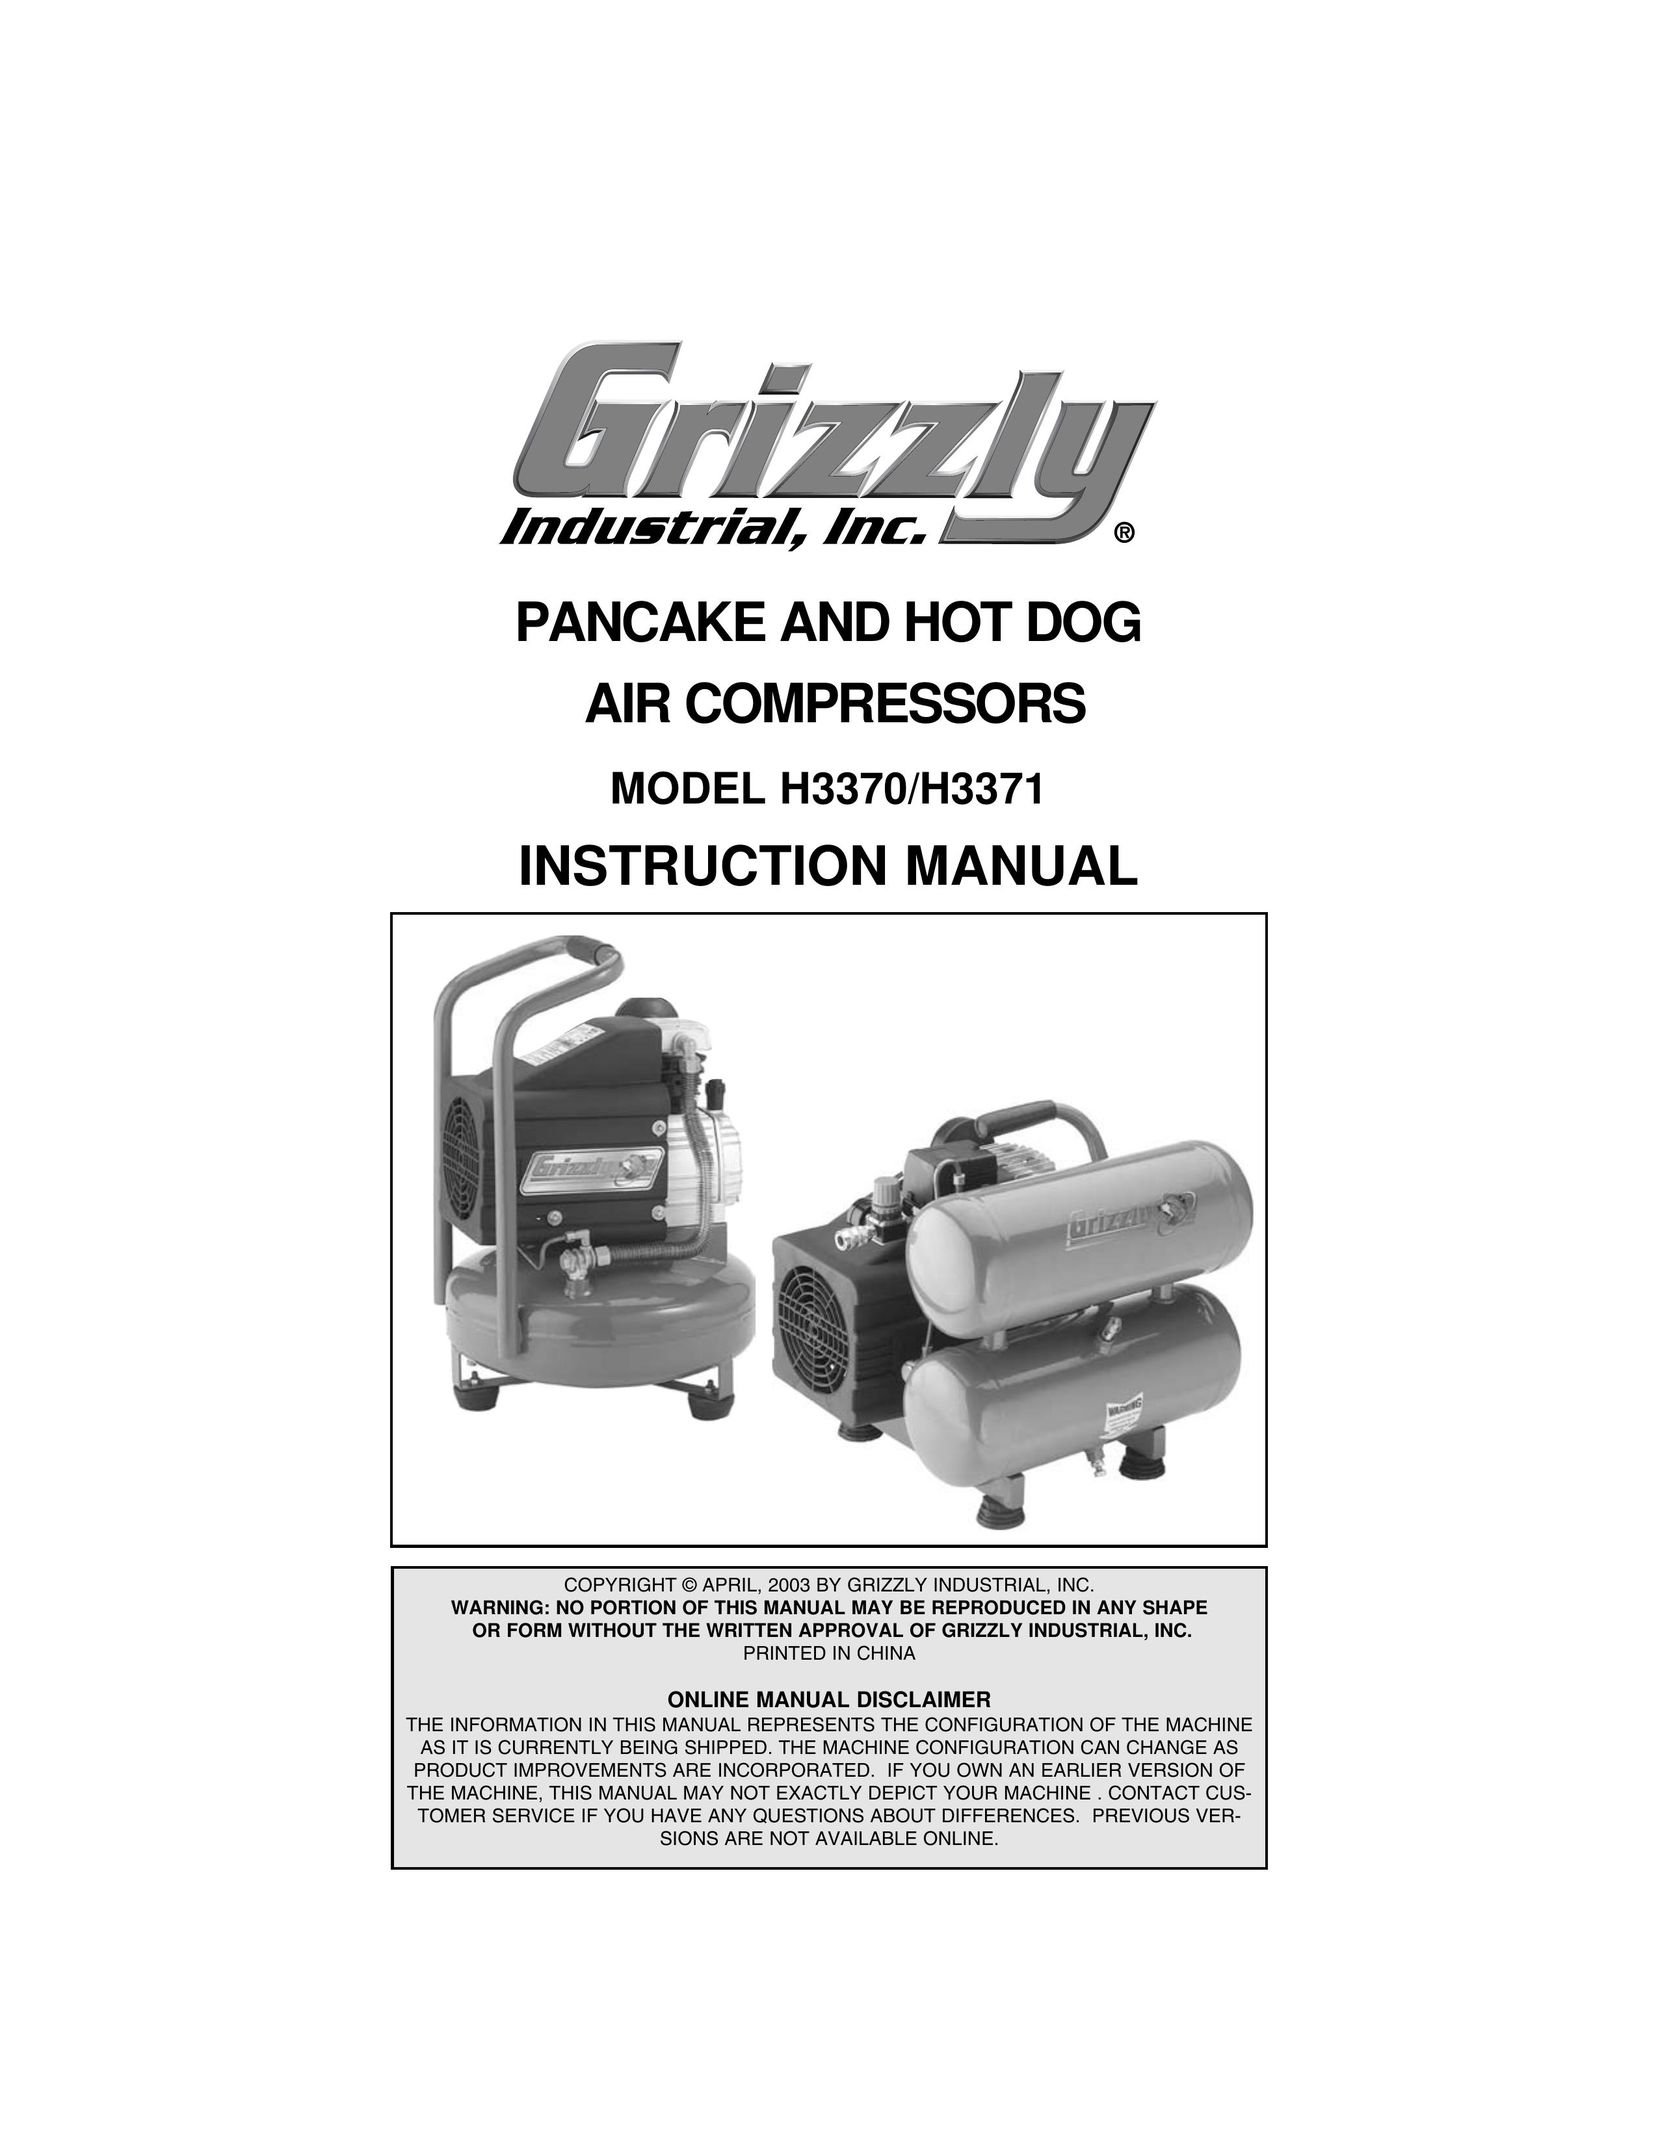 Grizzly H3370/H3371 Air Compressor User Manual